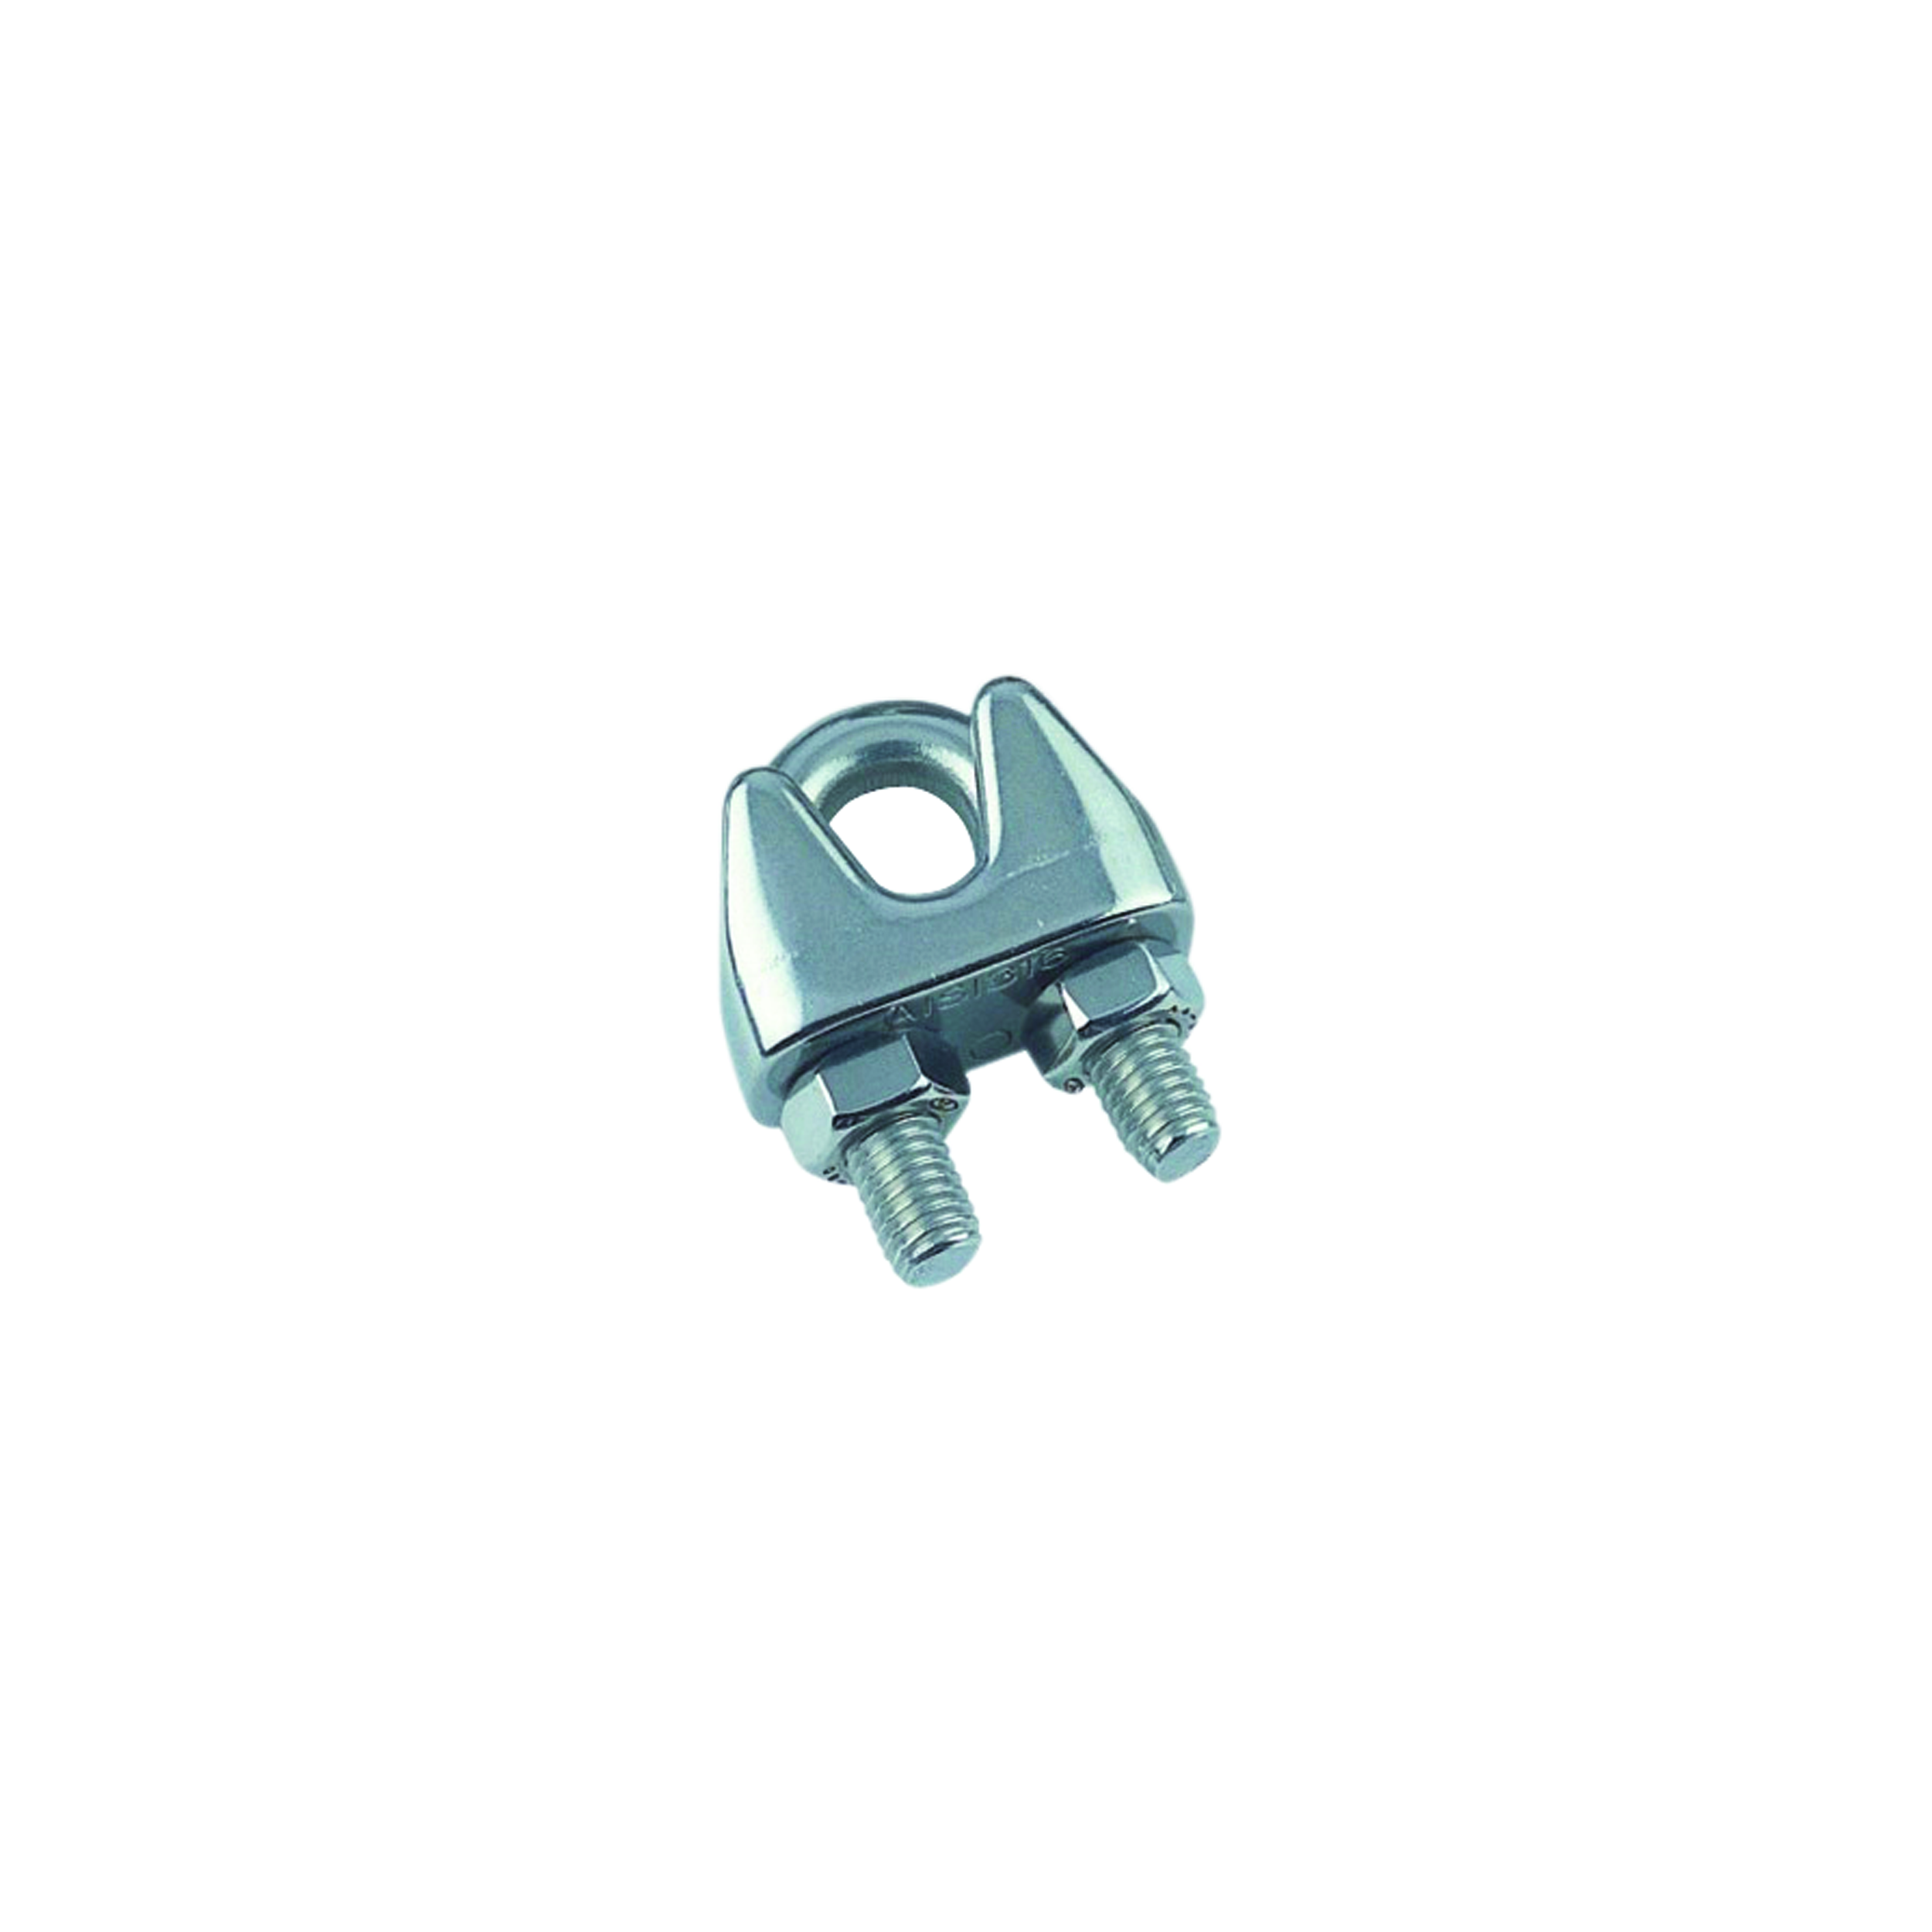 10 STCK / PCS. Wire rope clip A4  8mm